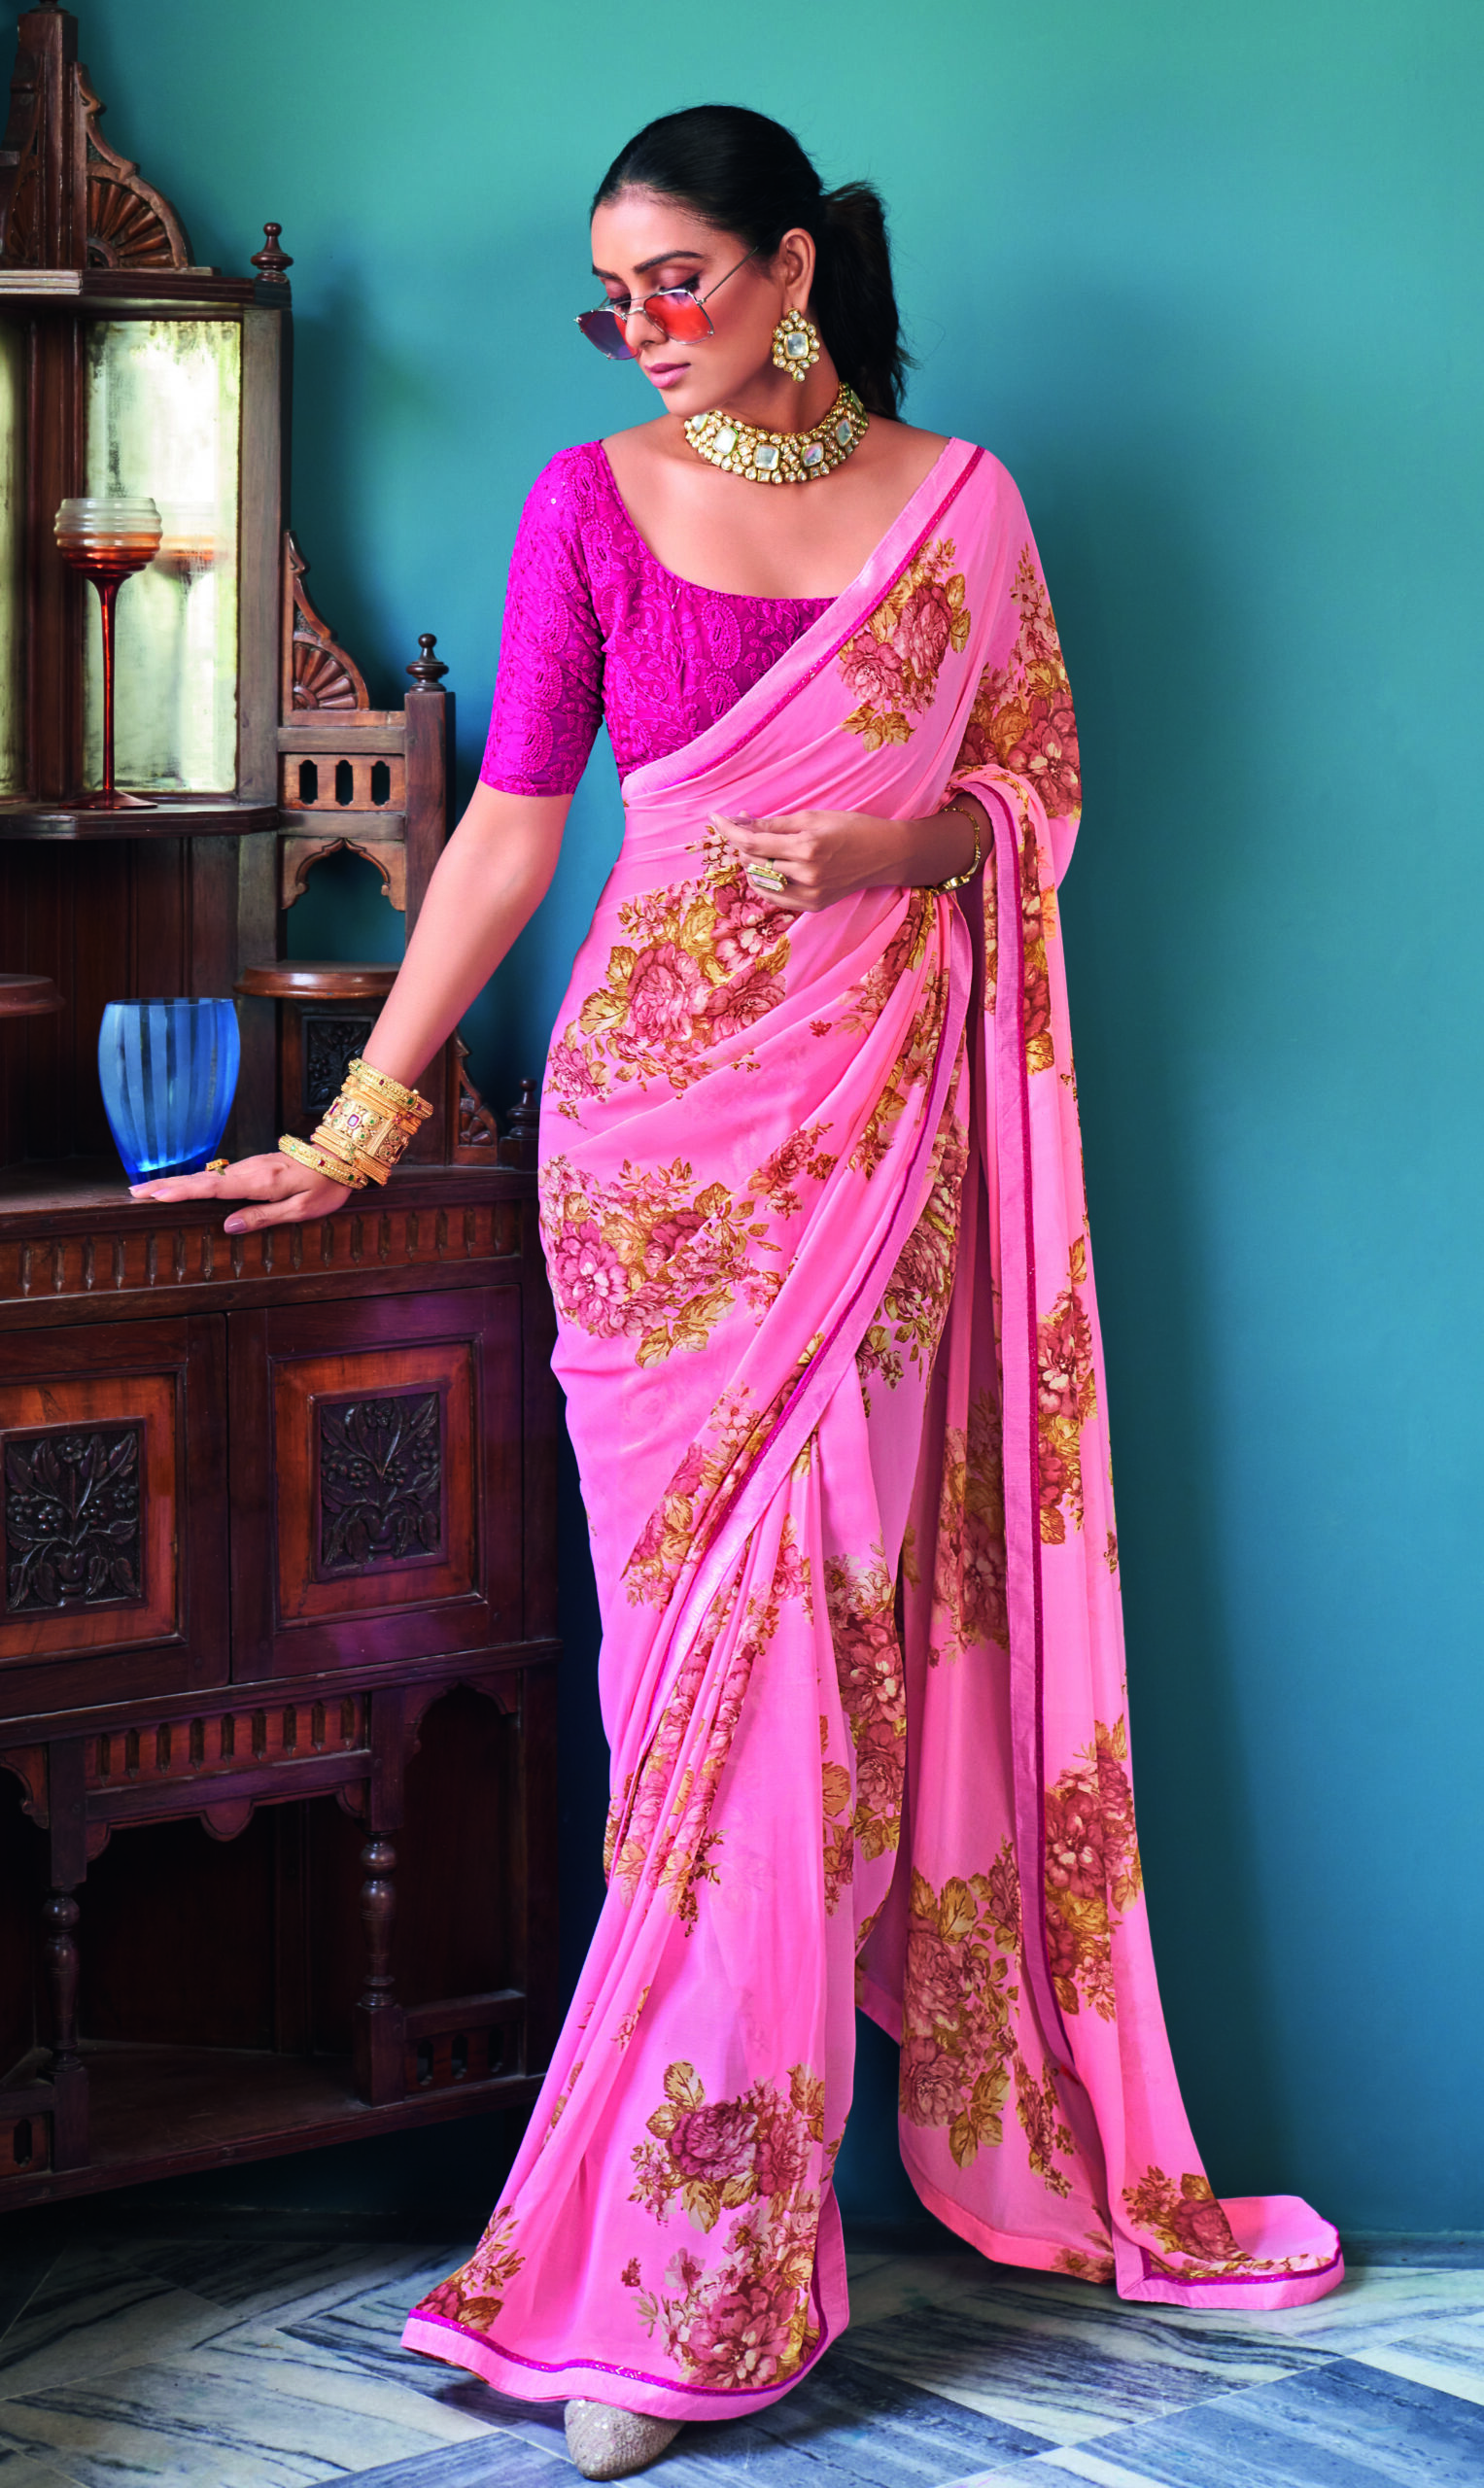 https://www.shahifits.in/wp-content/uploads/2023/04/Lightweight-Saree-for-Party-in-Pink-Saree-Everyday-Wear-scaled.jpg